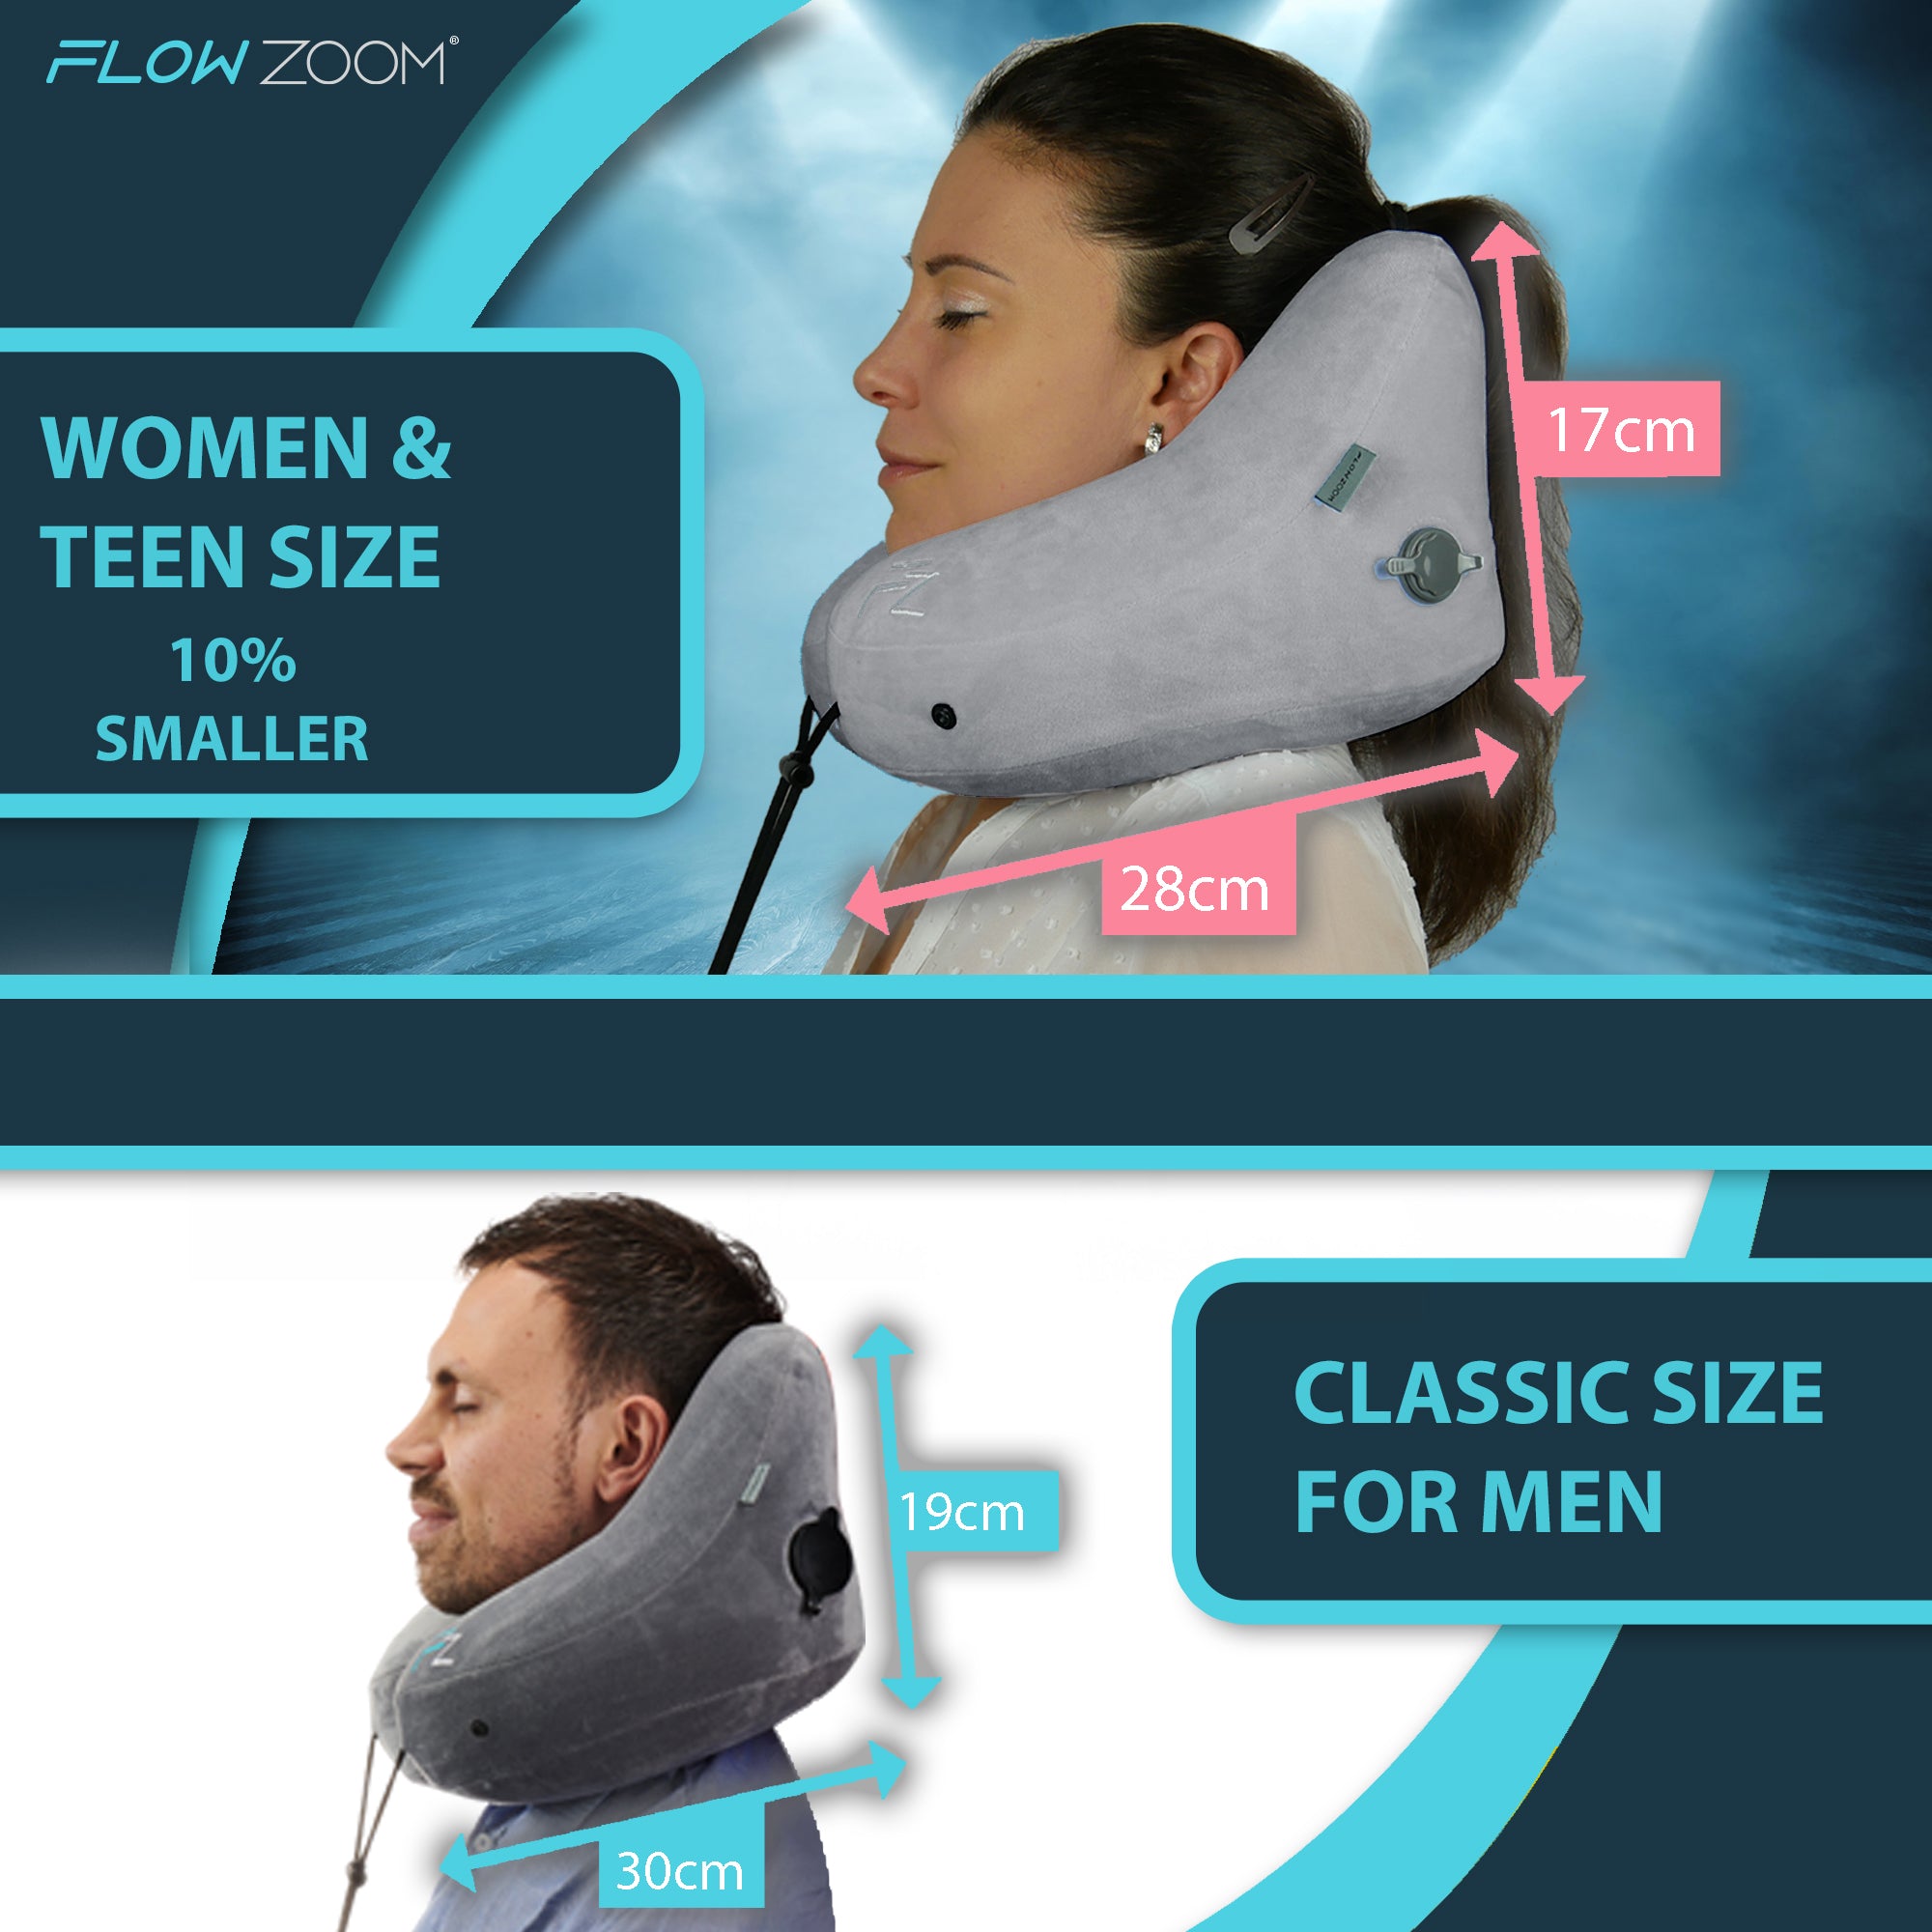 Travel Pillow with optimised for women size